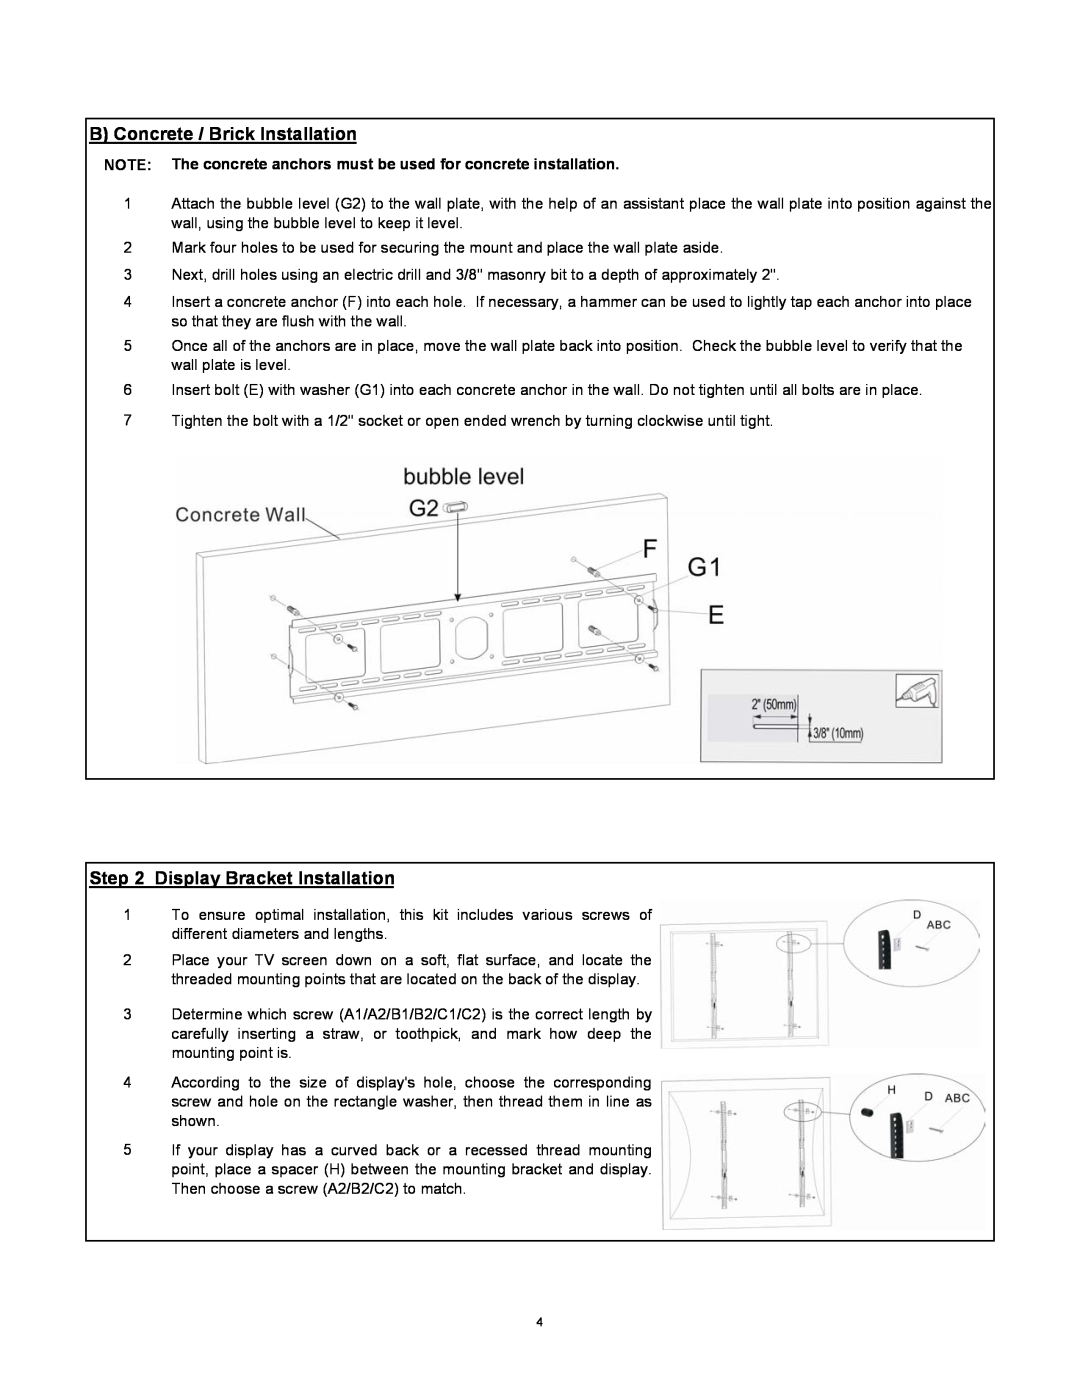 SIIG L2756 installation instructions B Concrete / Brick Installation, Display Bracket Installation 